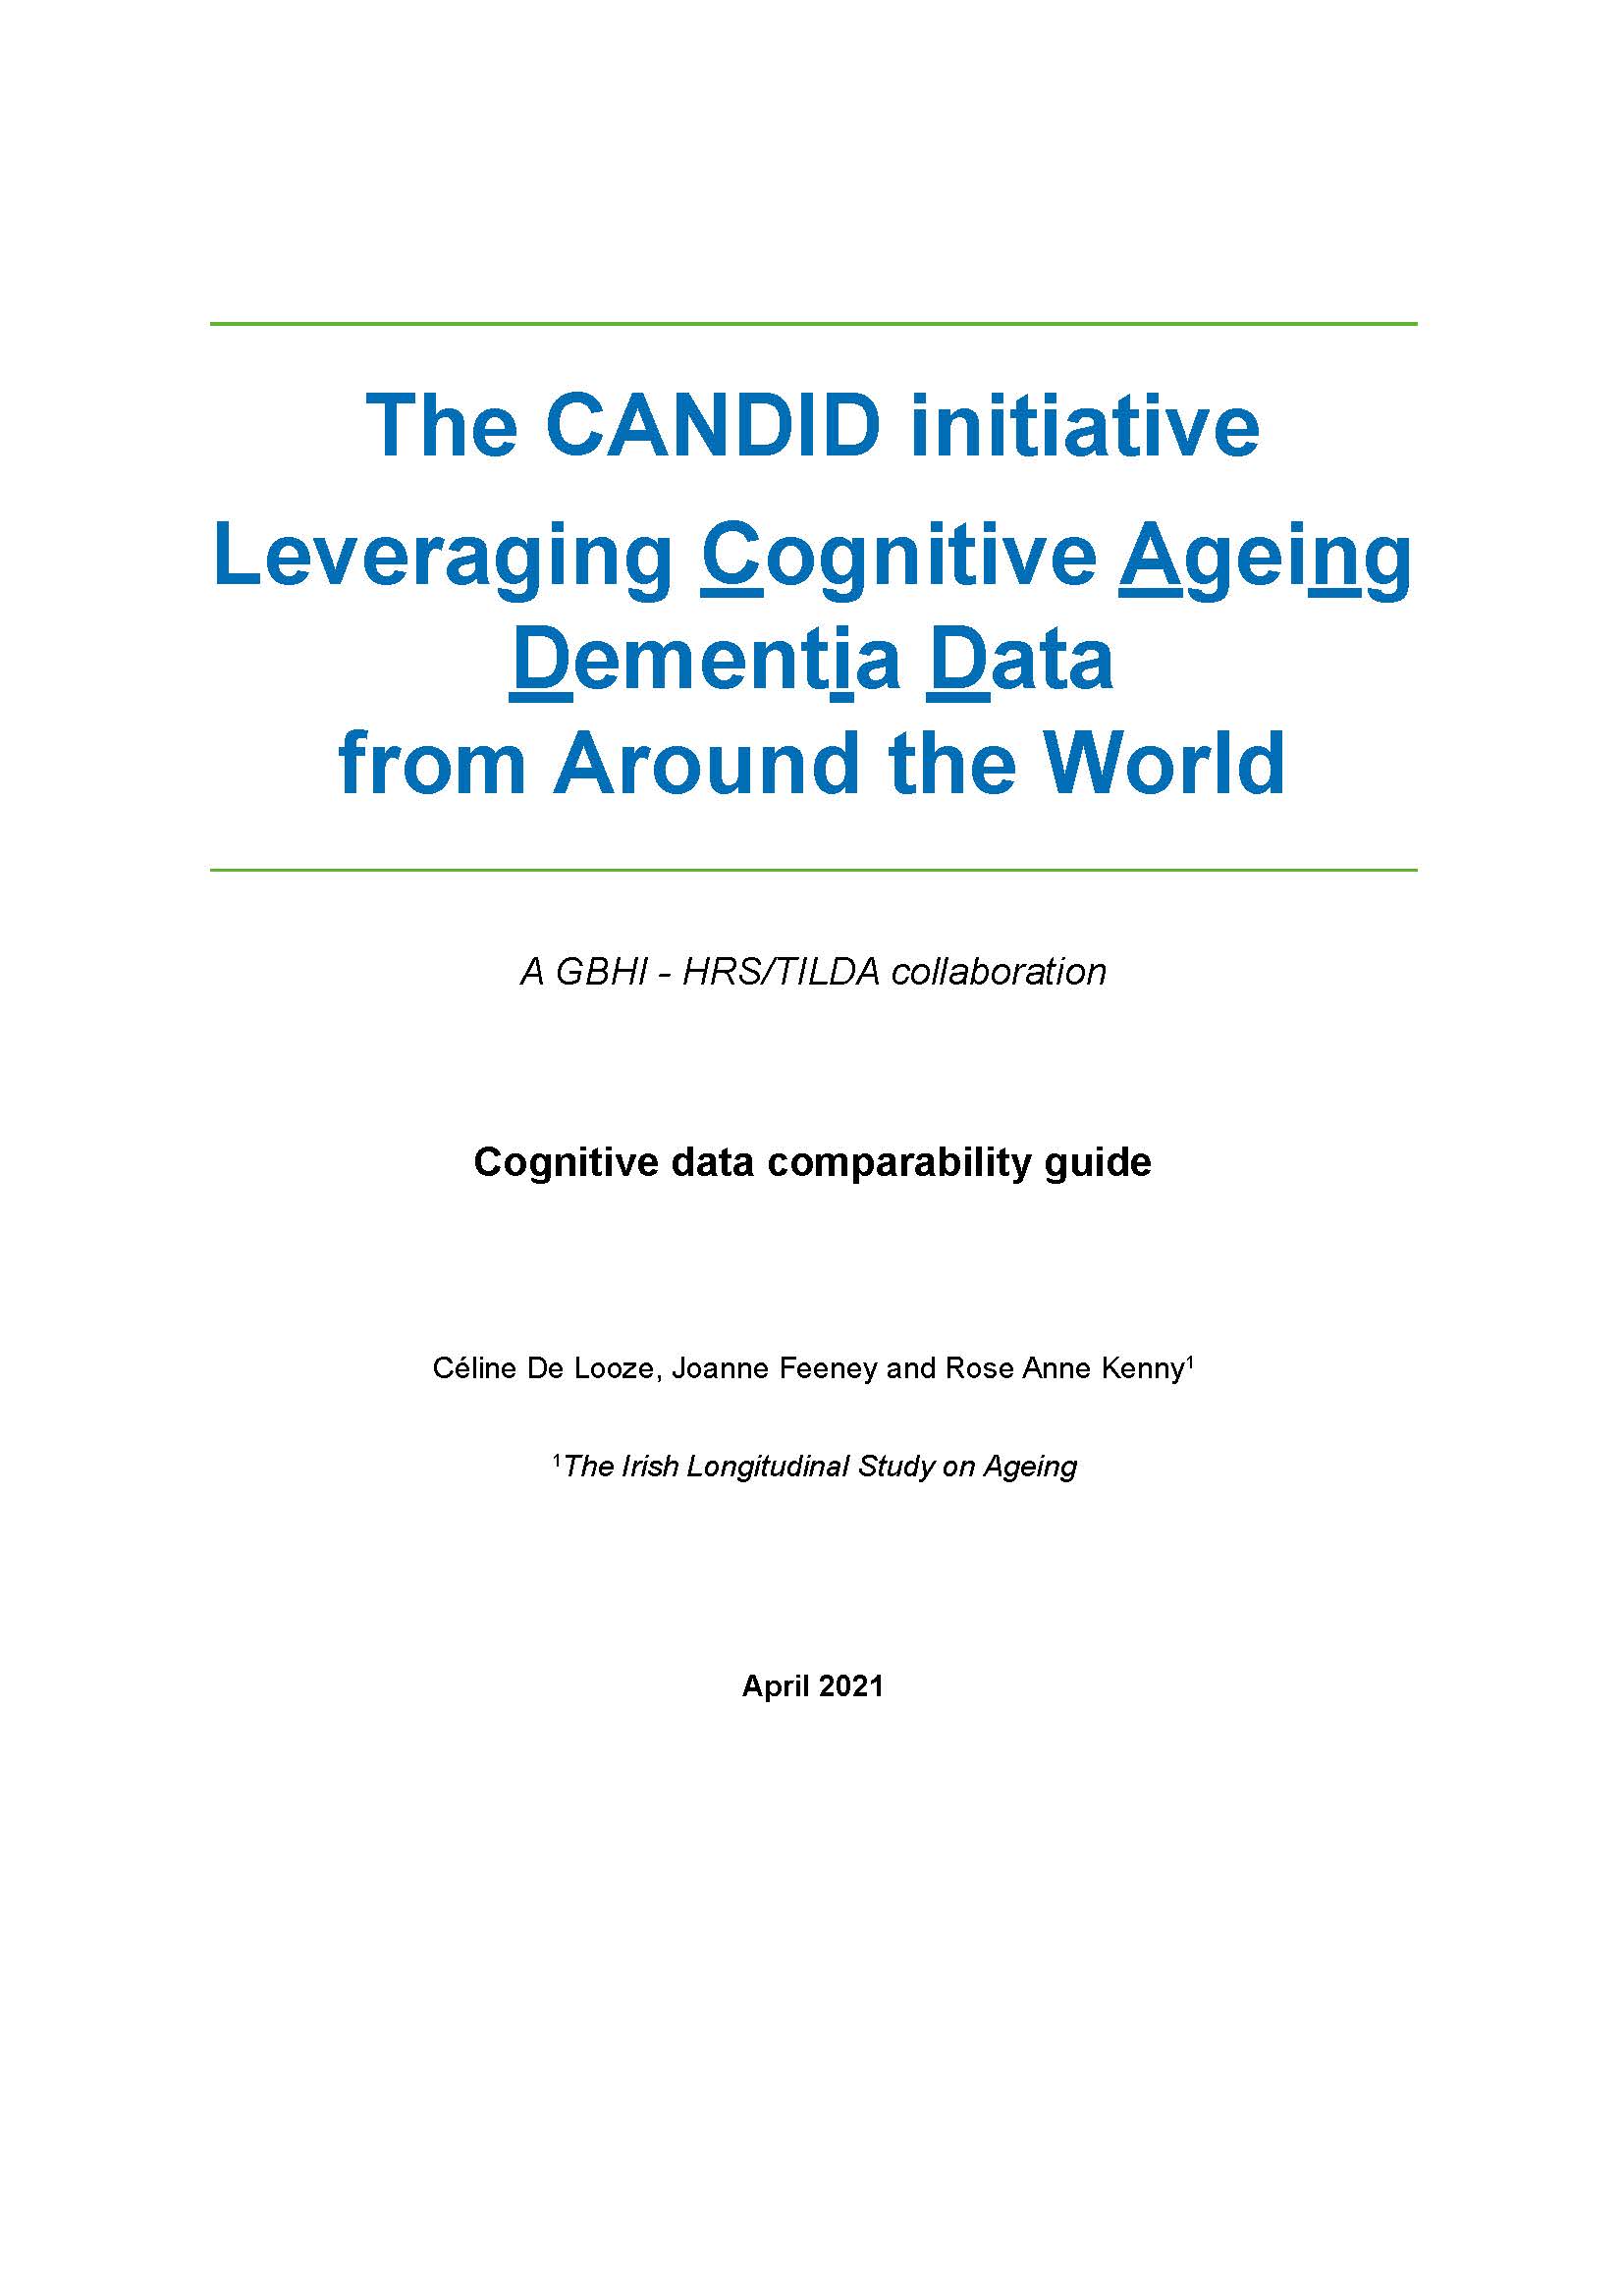 CANDID Cognitive Data Guide Report